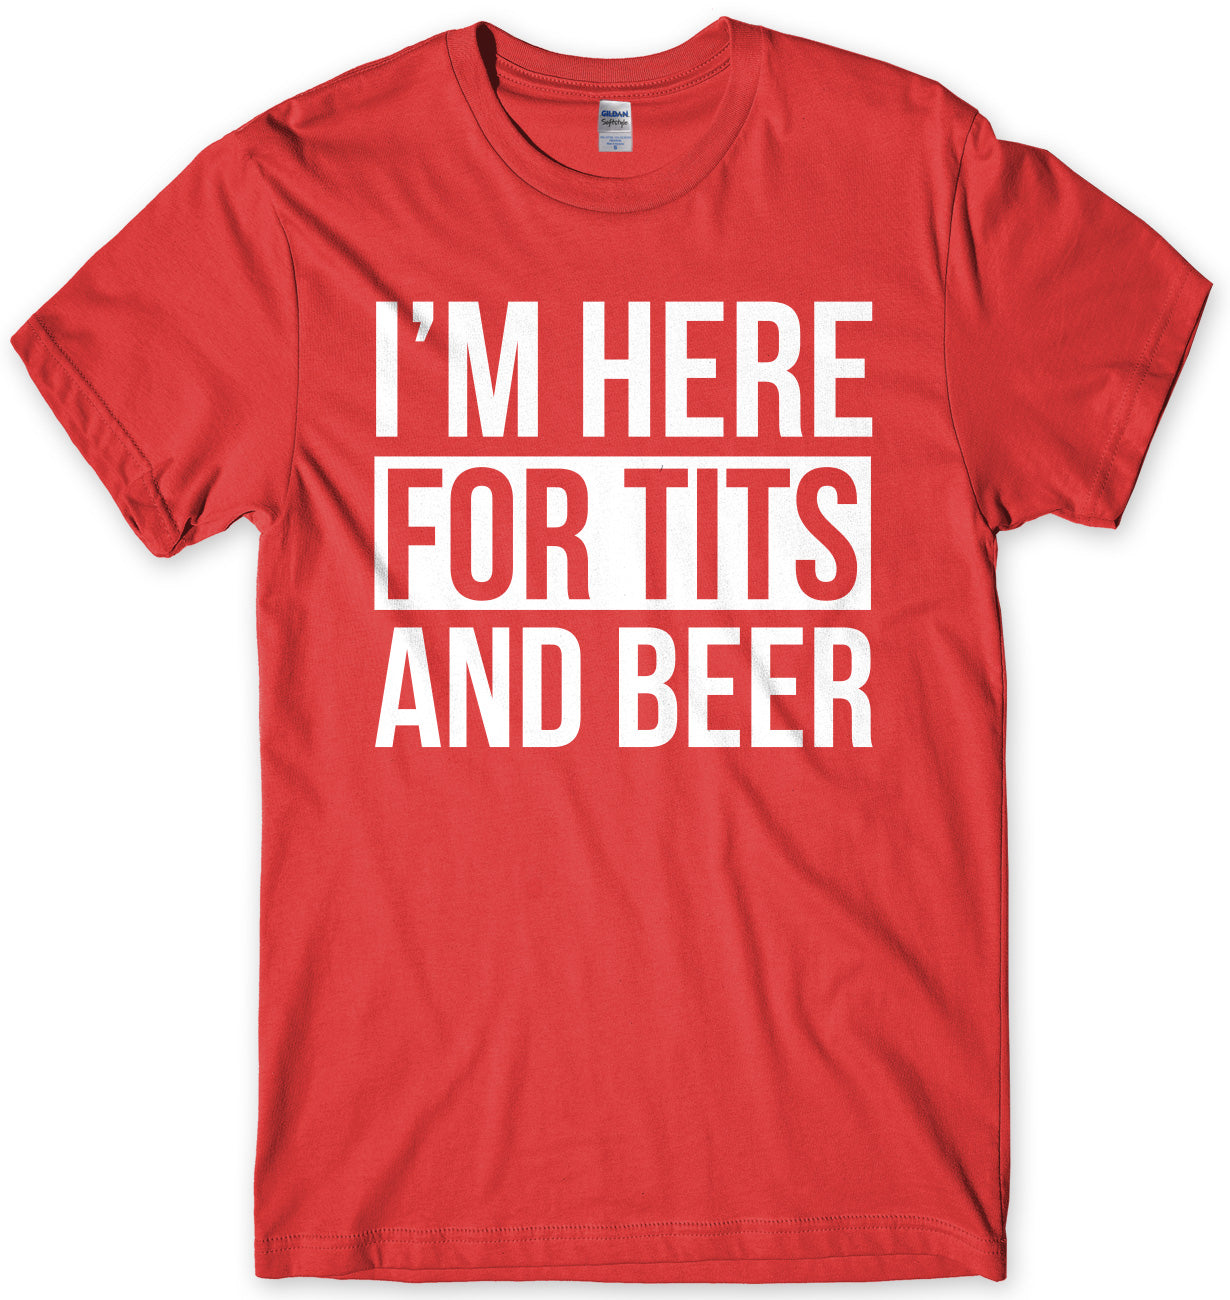 I'm Here For Tits And Beer Mens Unisex T-Shirt